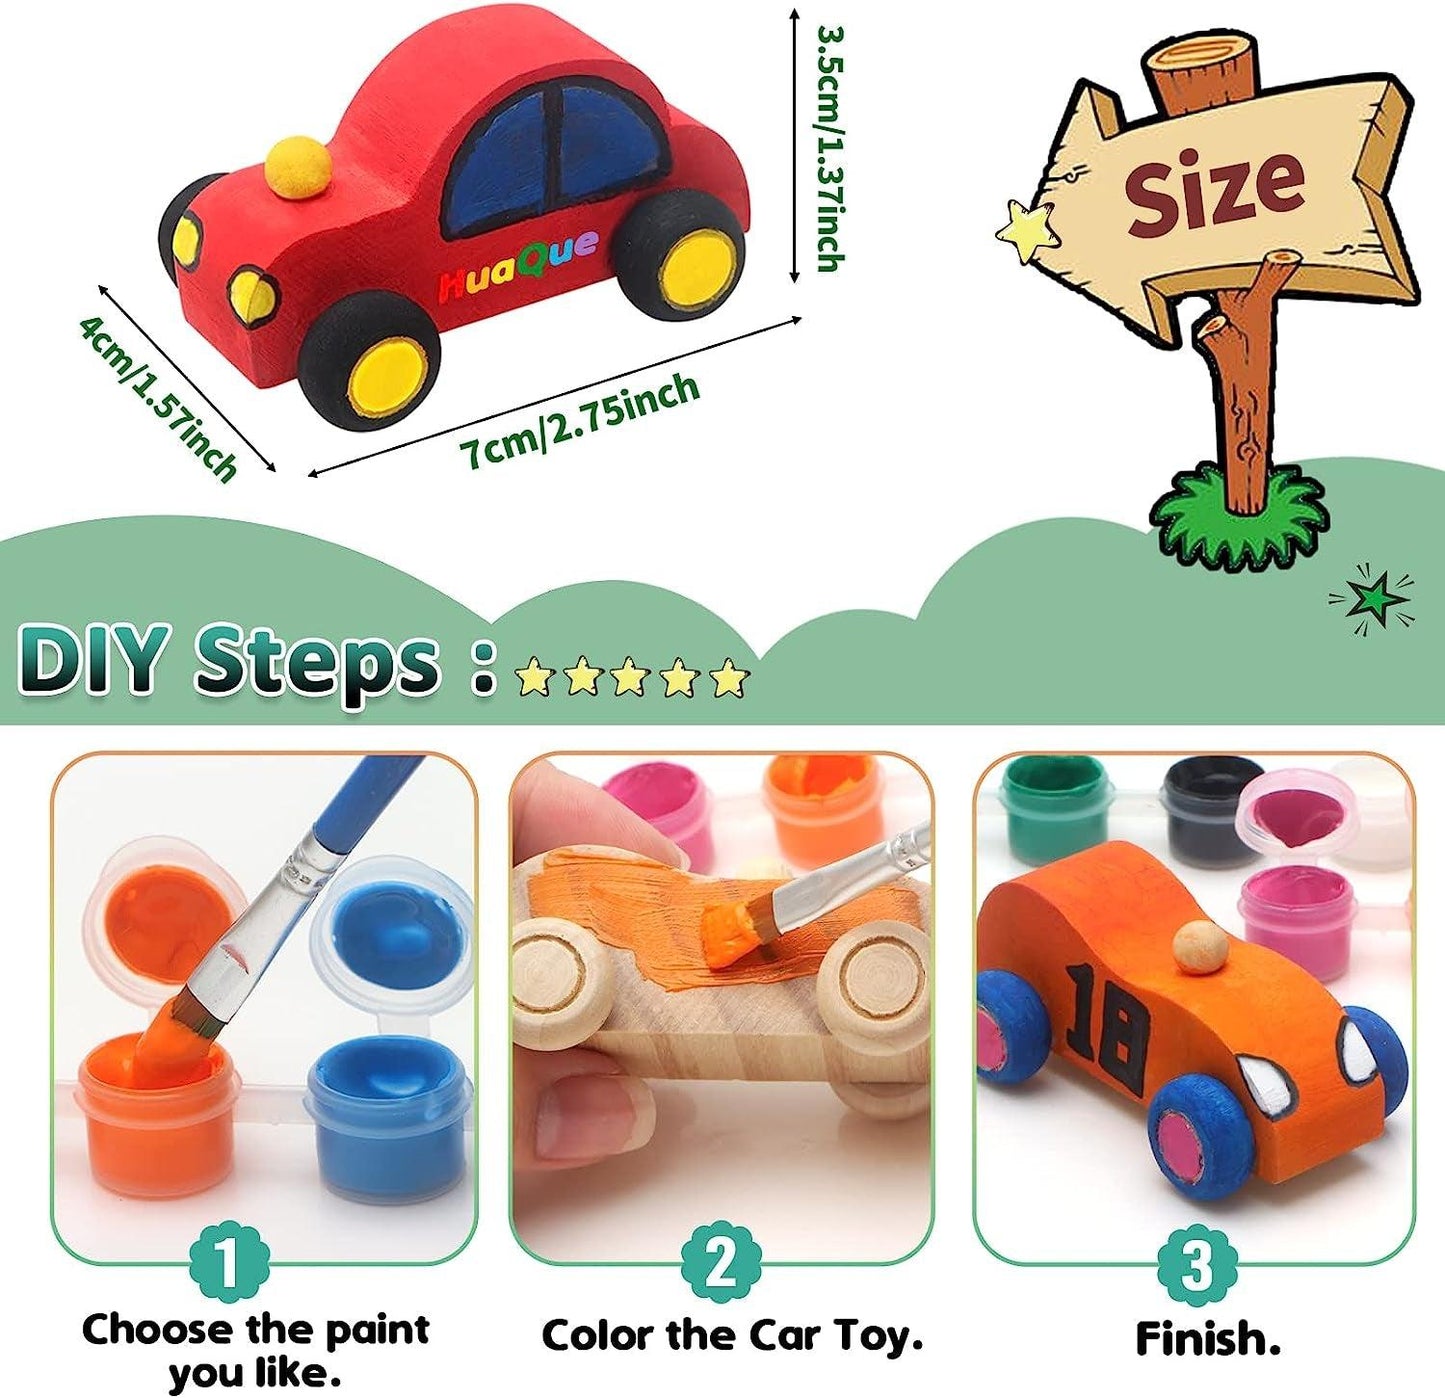 Unfinished Wooden Cars, Come with 18Pcs Unfinished Wooden Toy Cars and 1 Set Paint Colors - WoodArtSupply